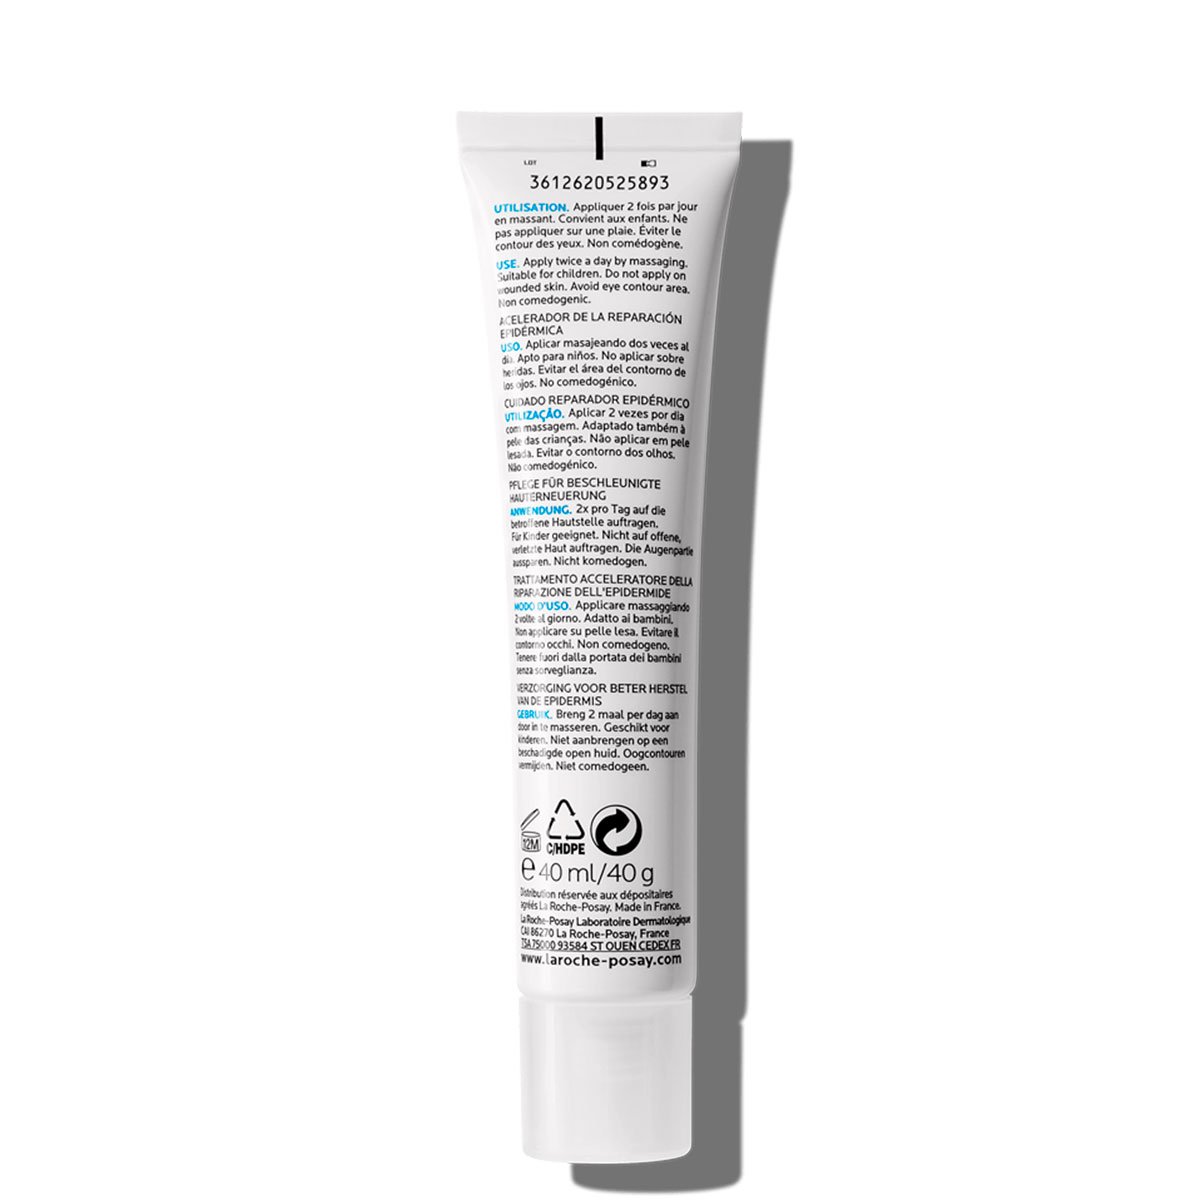 La Roche Posay ProductPage Damaged Cicaplast Gel B5 Pro Recovery 40ml 3337875586269 Back